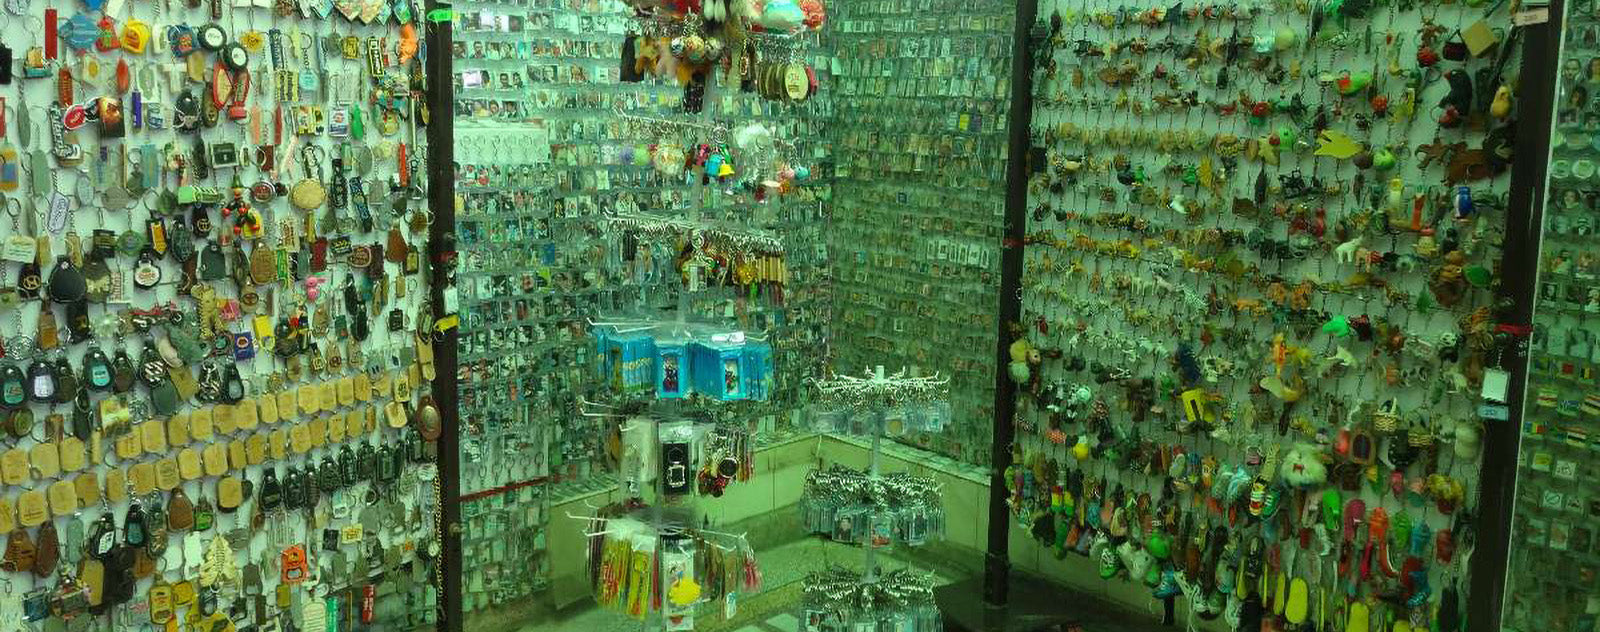 largest collection of key rings in the world